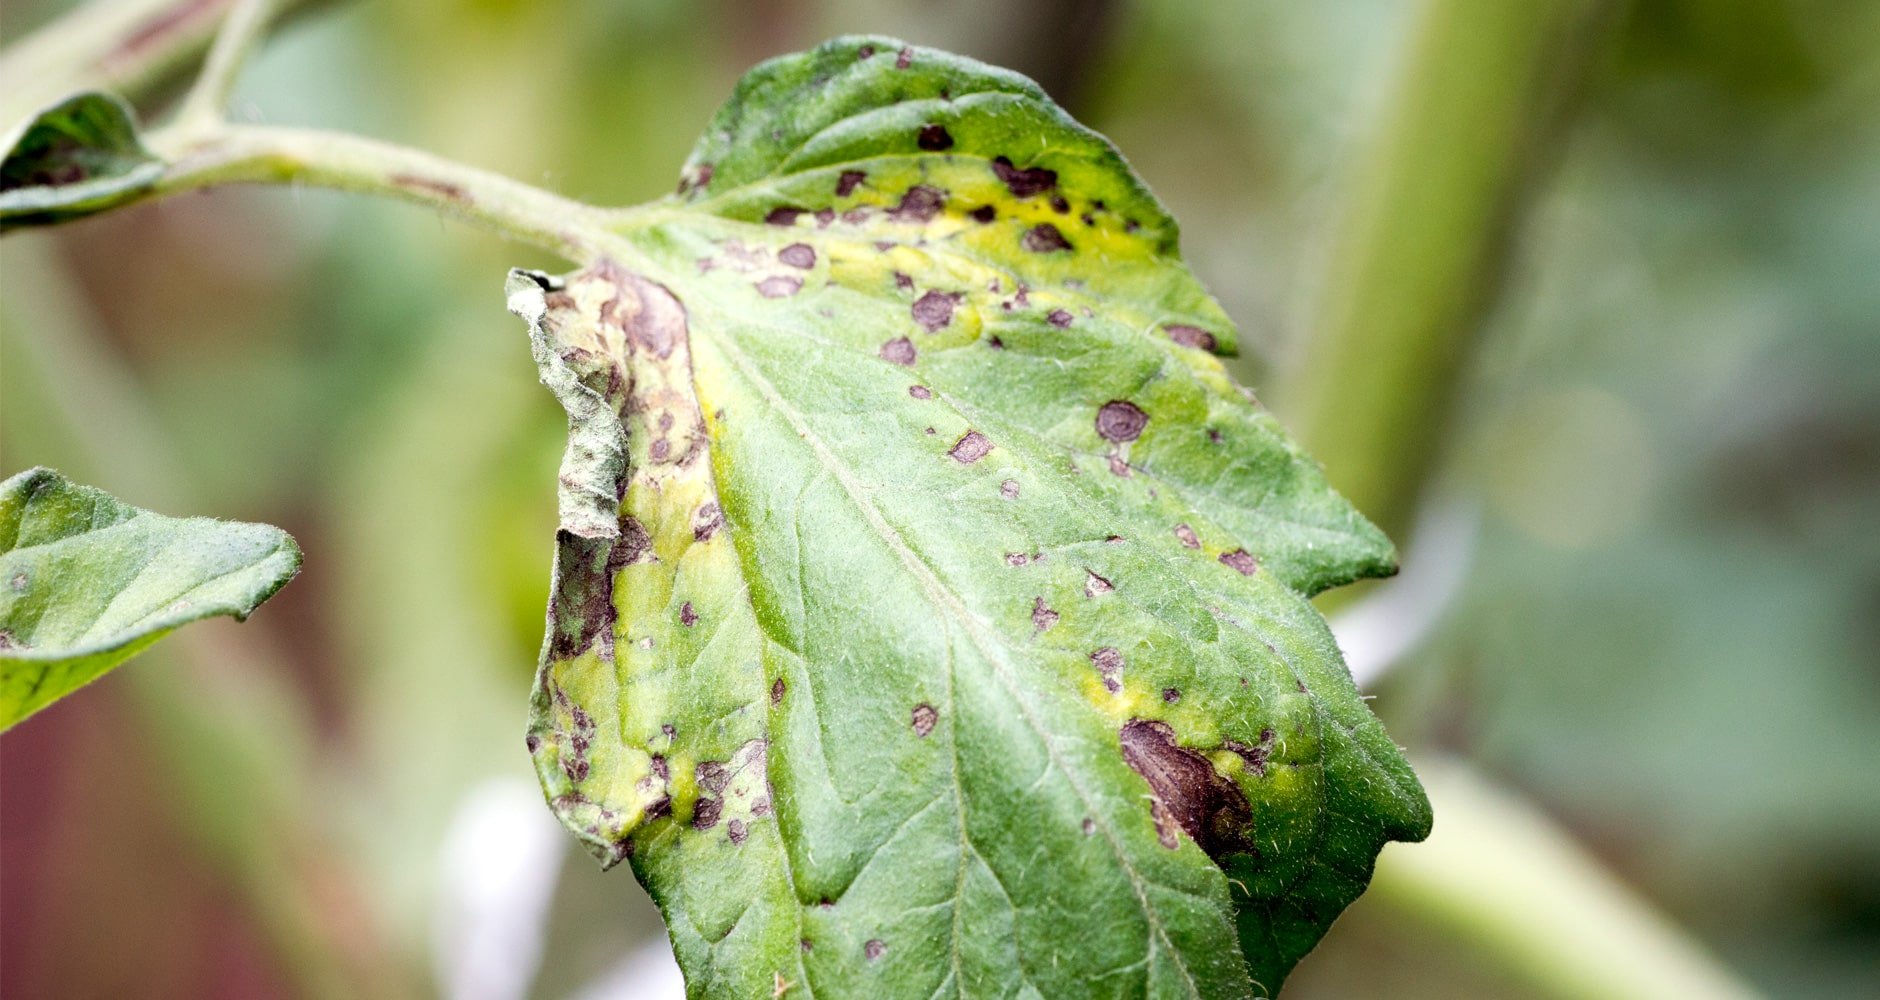 Tomato plant with early blight.